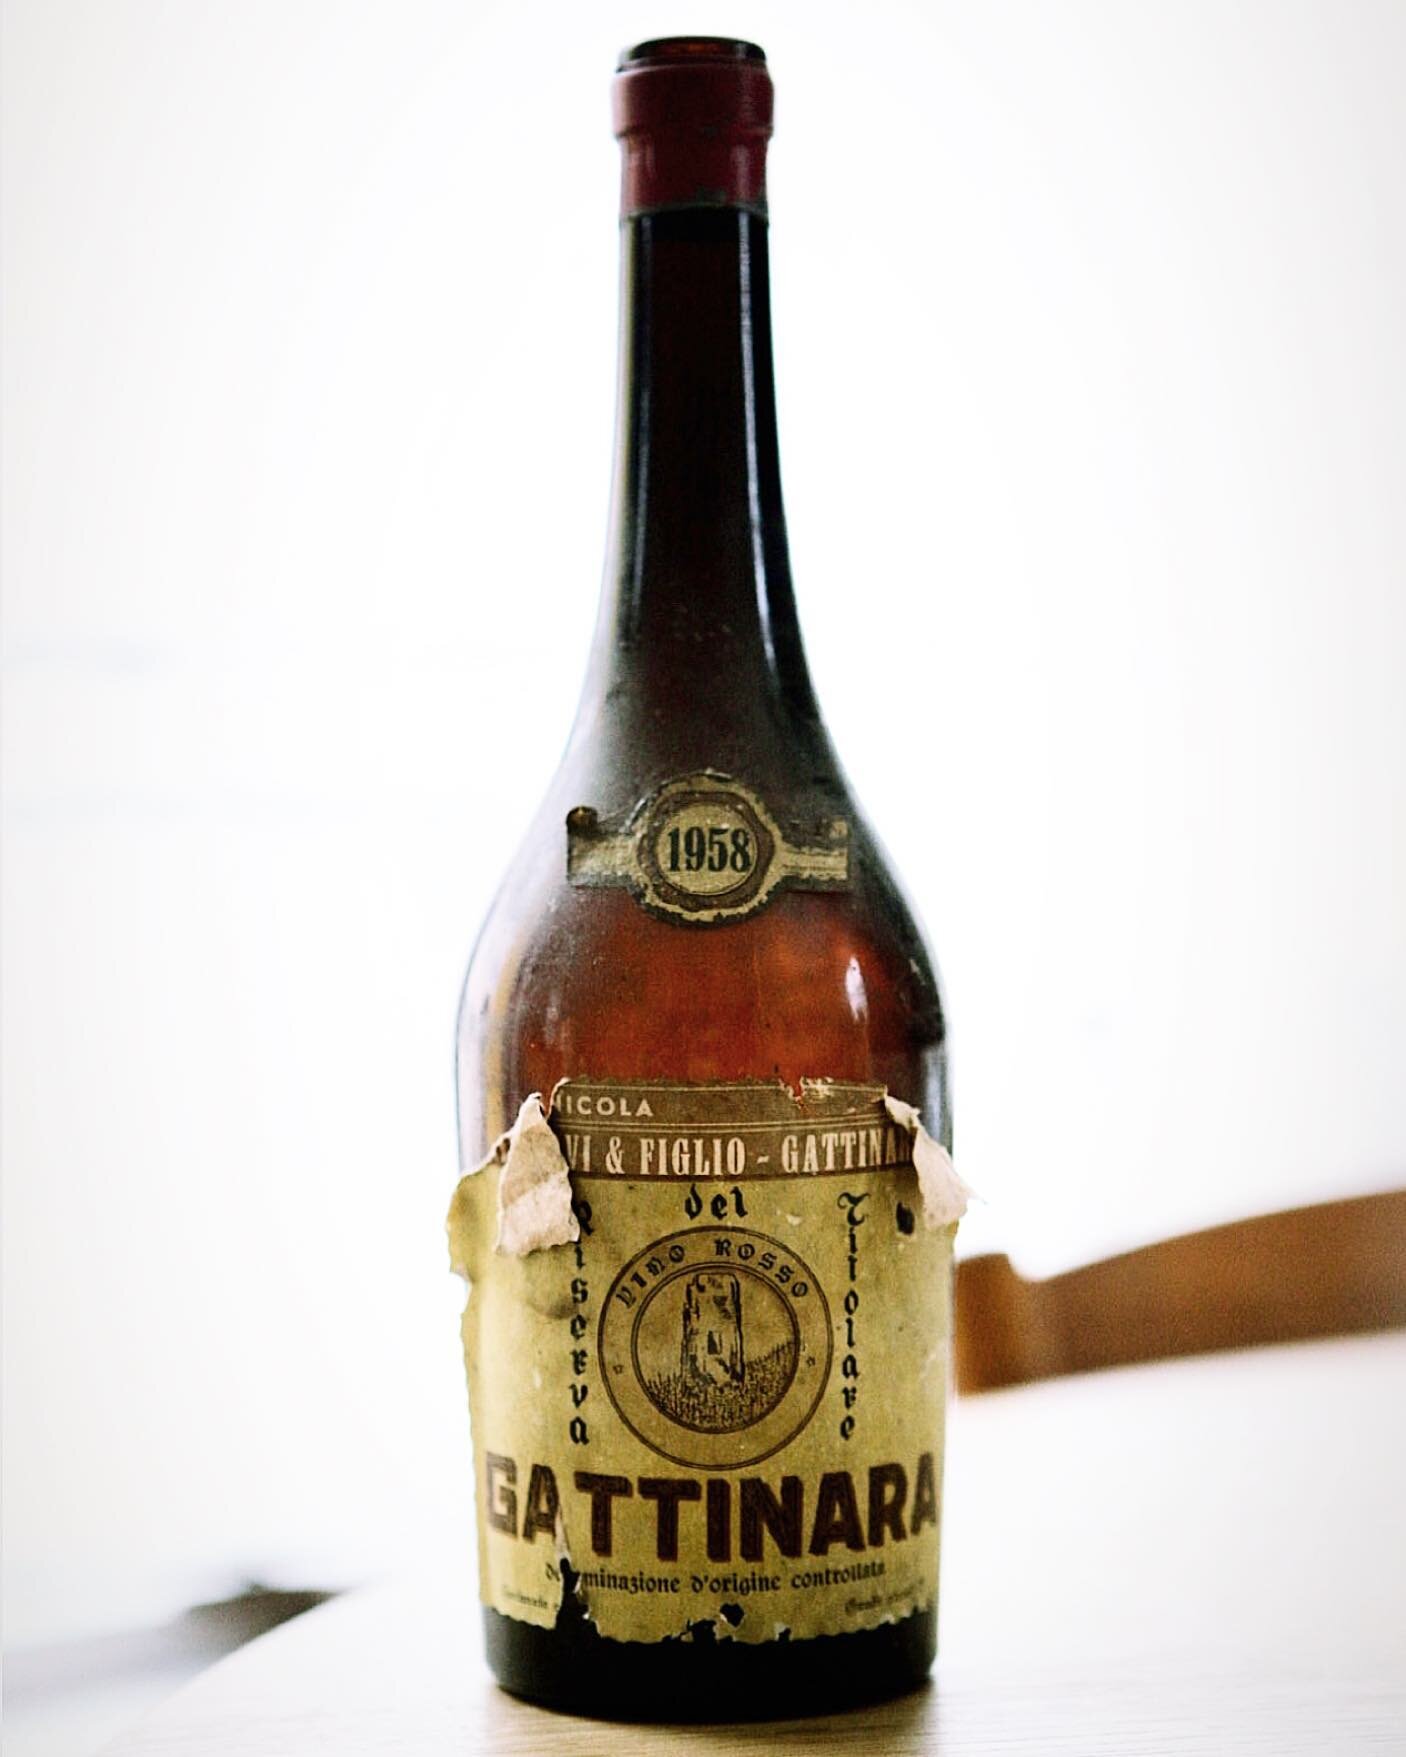 As a latent hoarder, I can only allow myself to keep a very few empty bottles at home. This is one of them. It&rsquo;s about the design, and also about my own way into wine. The first full case of wine I bought was a Gattinara. Years later, my first 